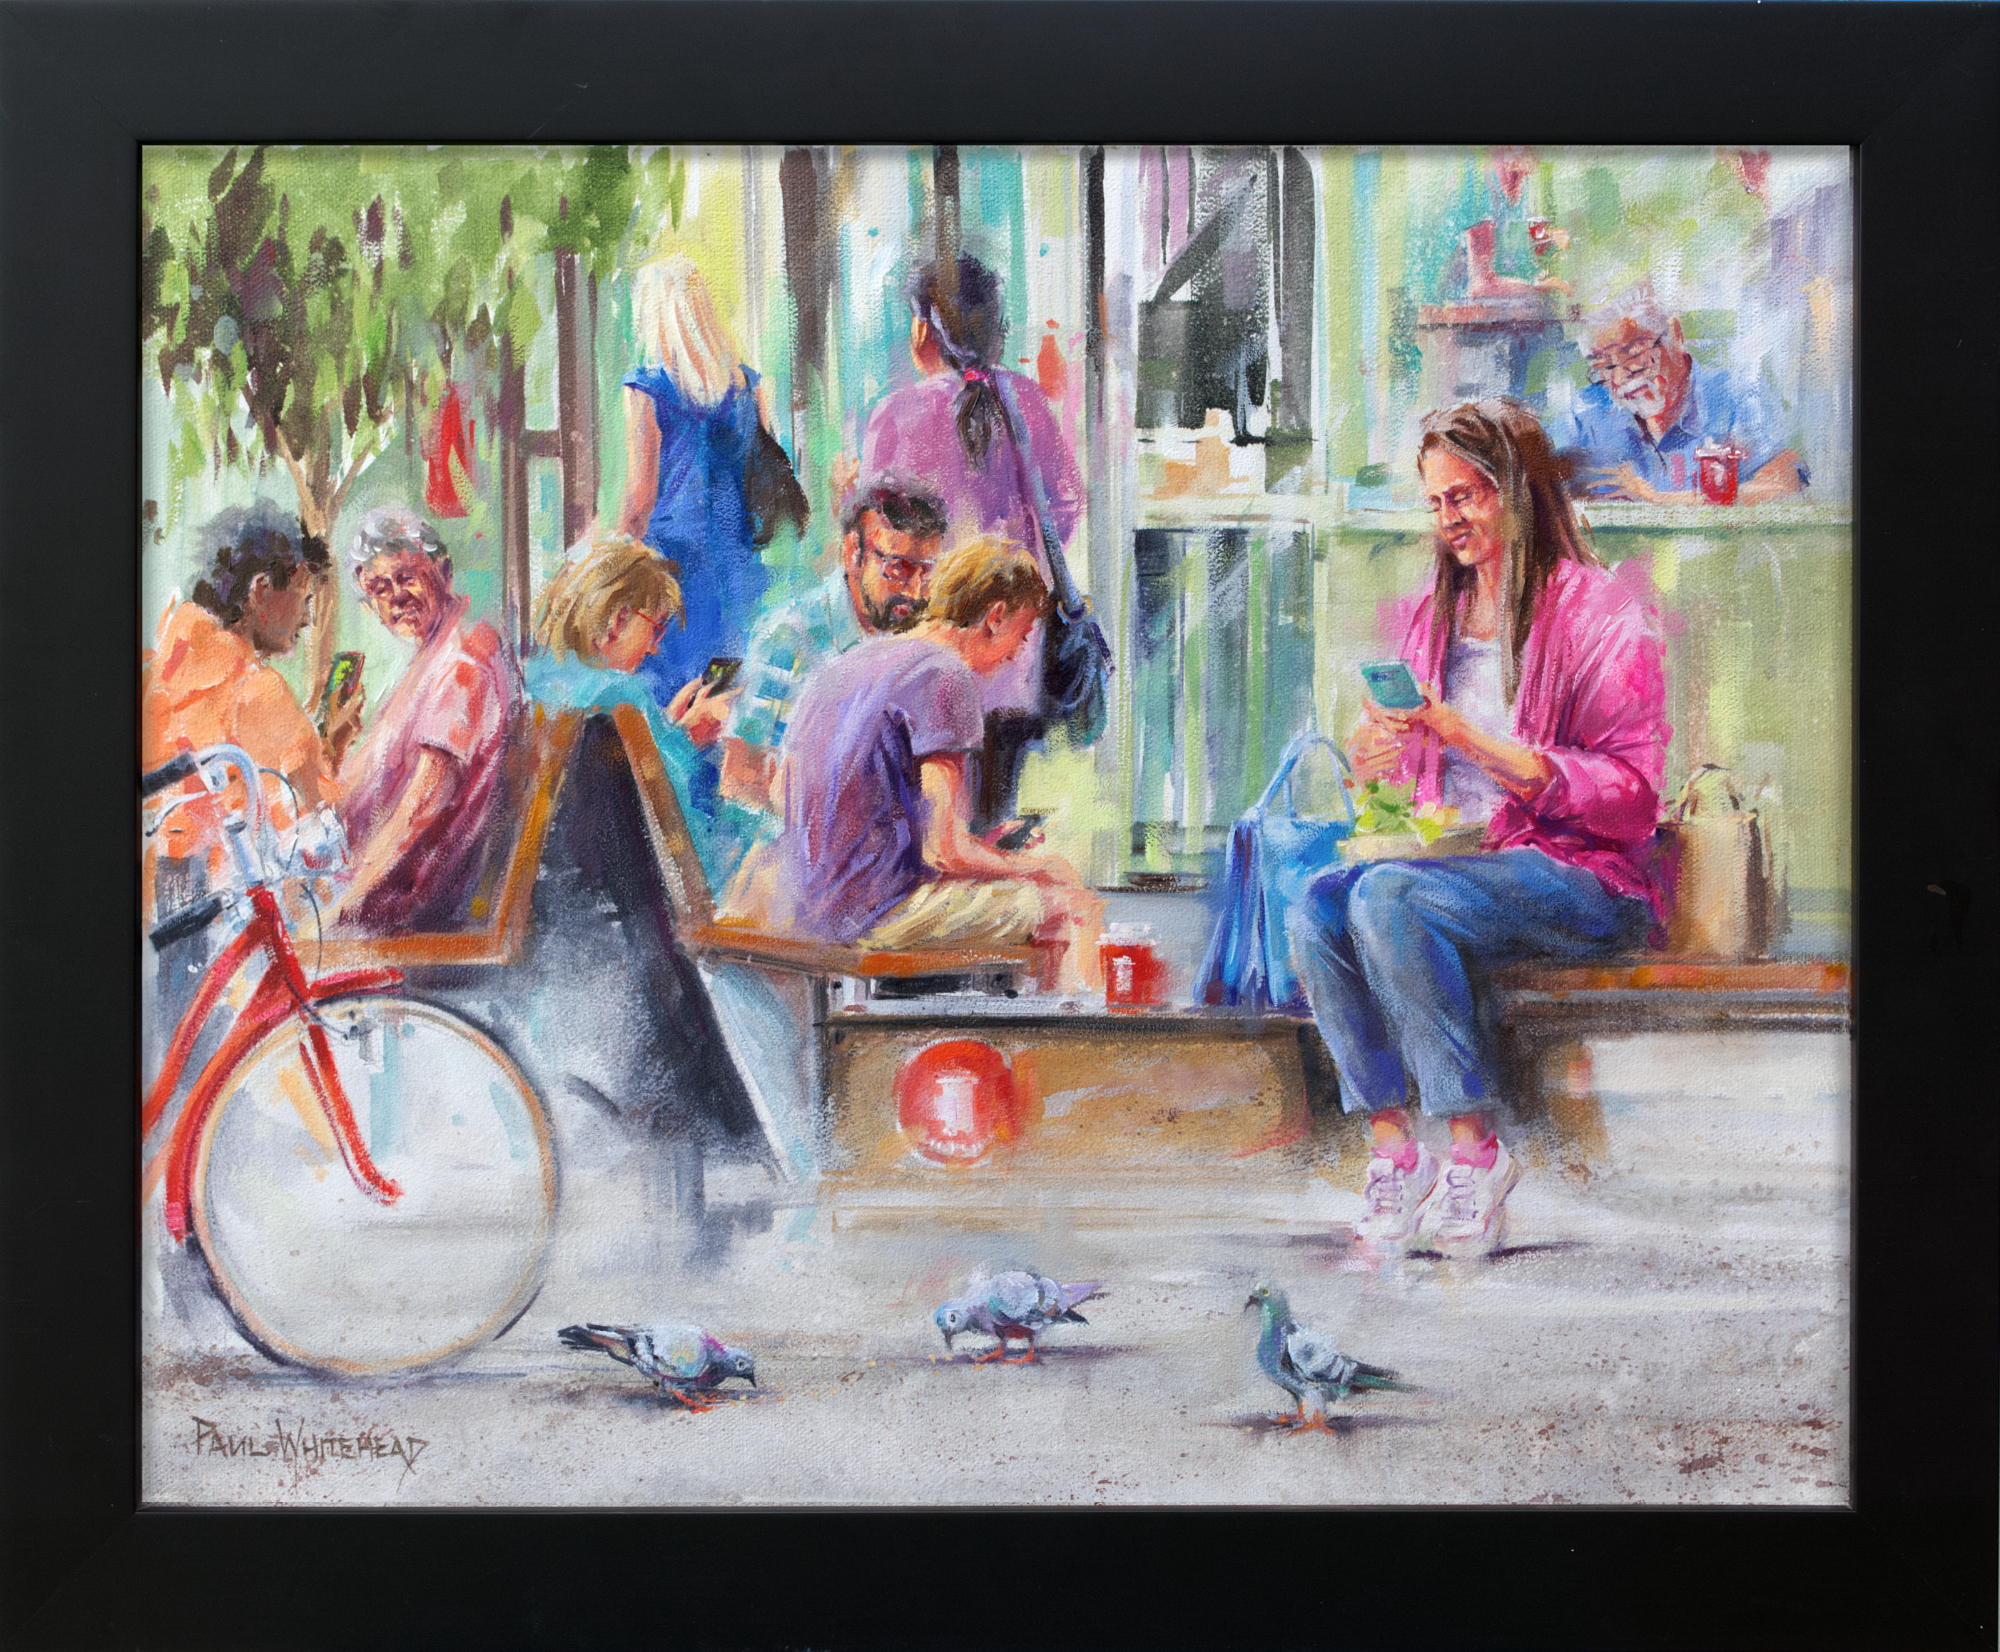 Lunch with friends by Paul Whitehead | Lethbridge 20000 2023 Finalists | Lethbridge Gallery